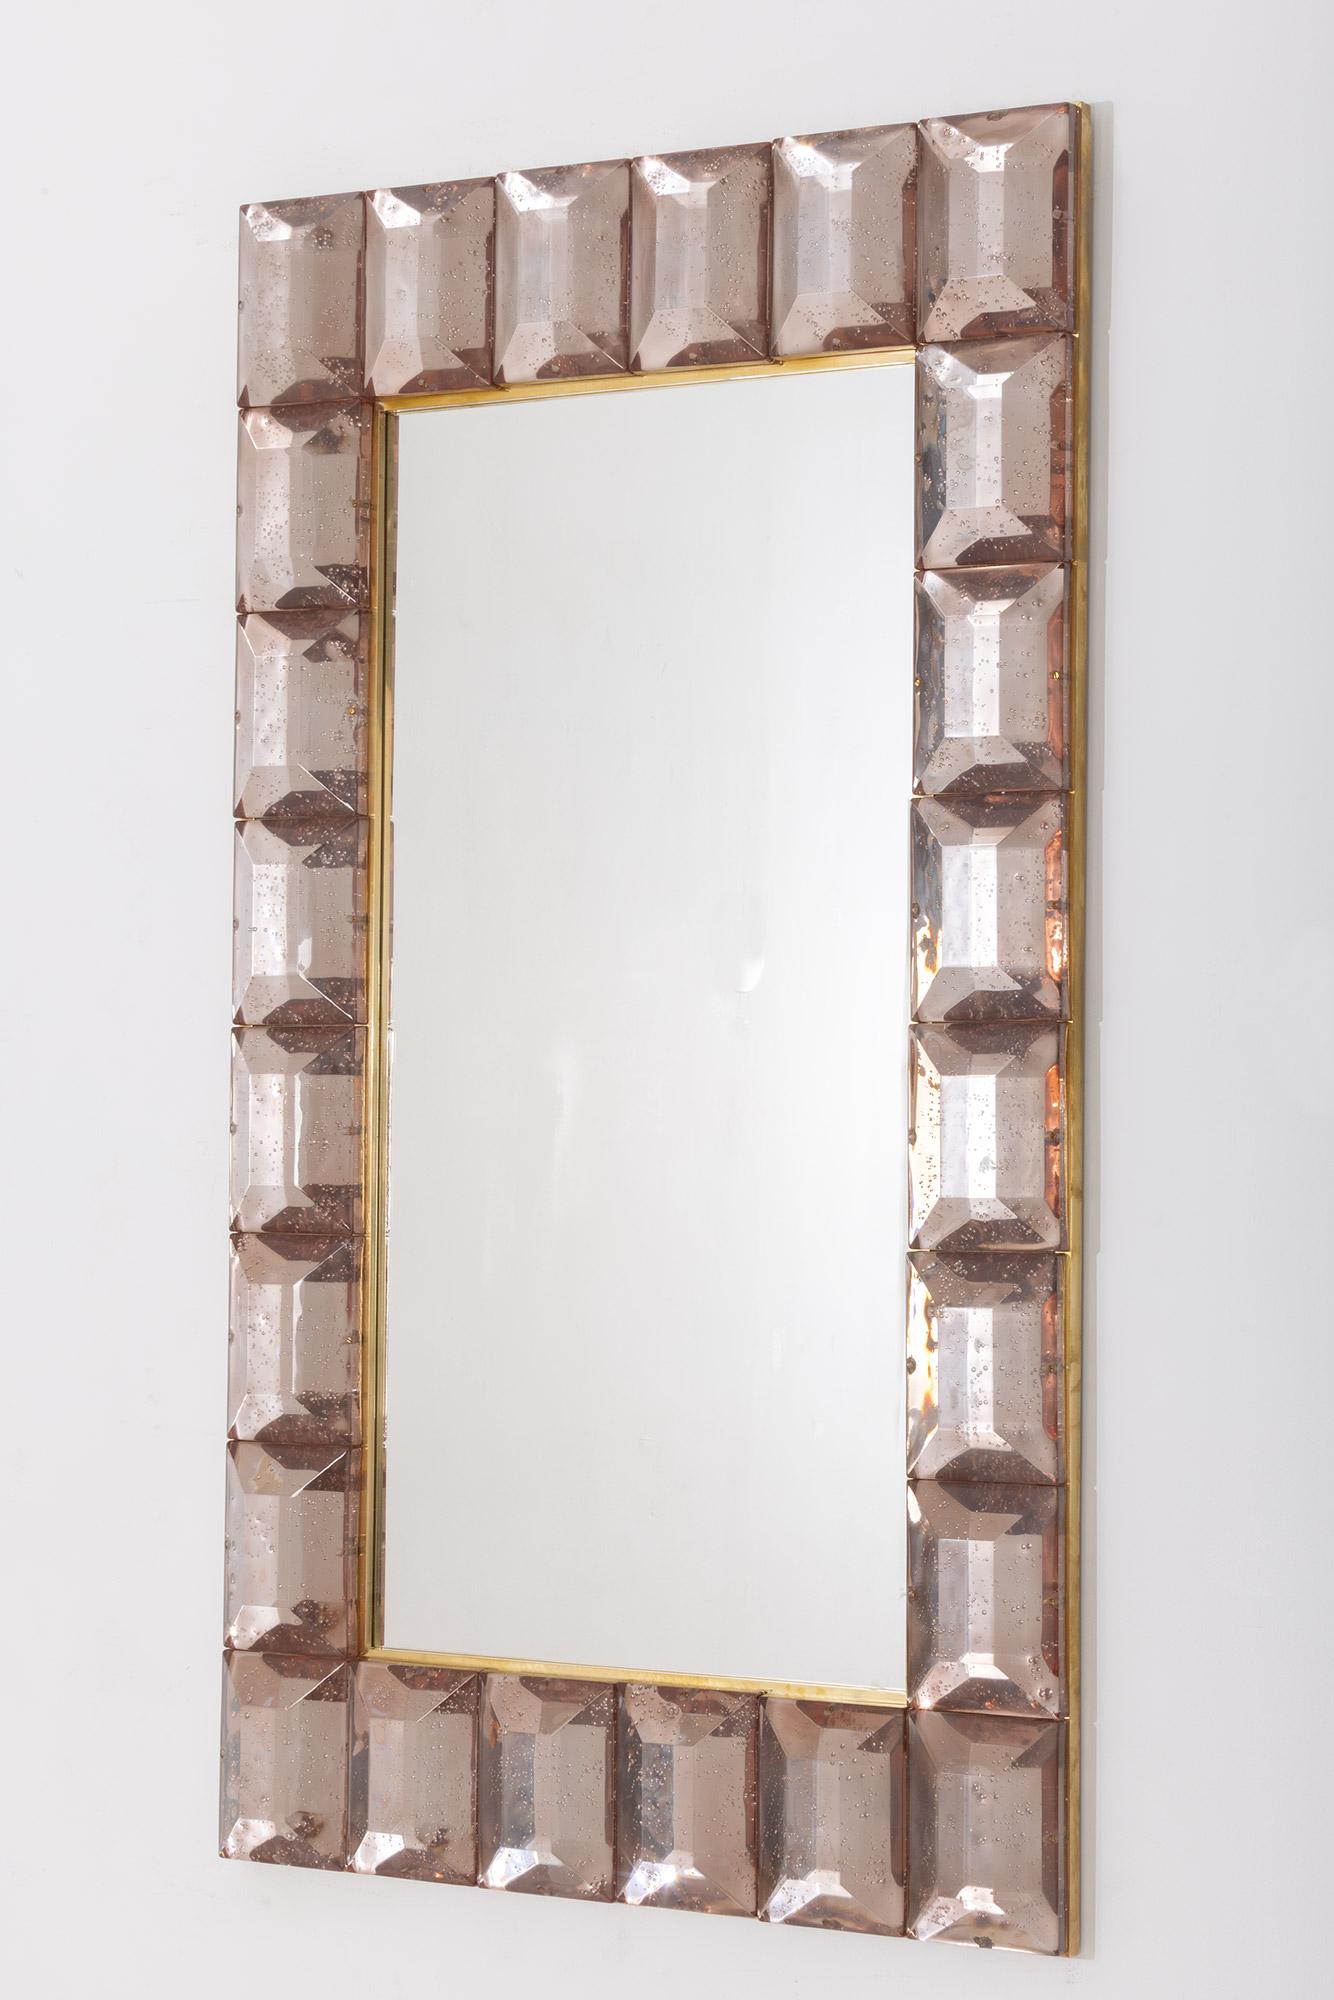 Large pink diamond cut Murano glass mirrors, in stock
Contemporary and customizable mirror with a faceted Murano glass frame, edged in brass and luxury handcrafted by a team of artisans in Venice, Italy.
Each pink glass block has a highly polished